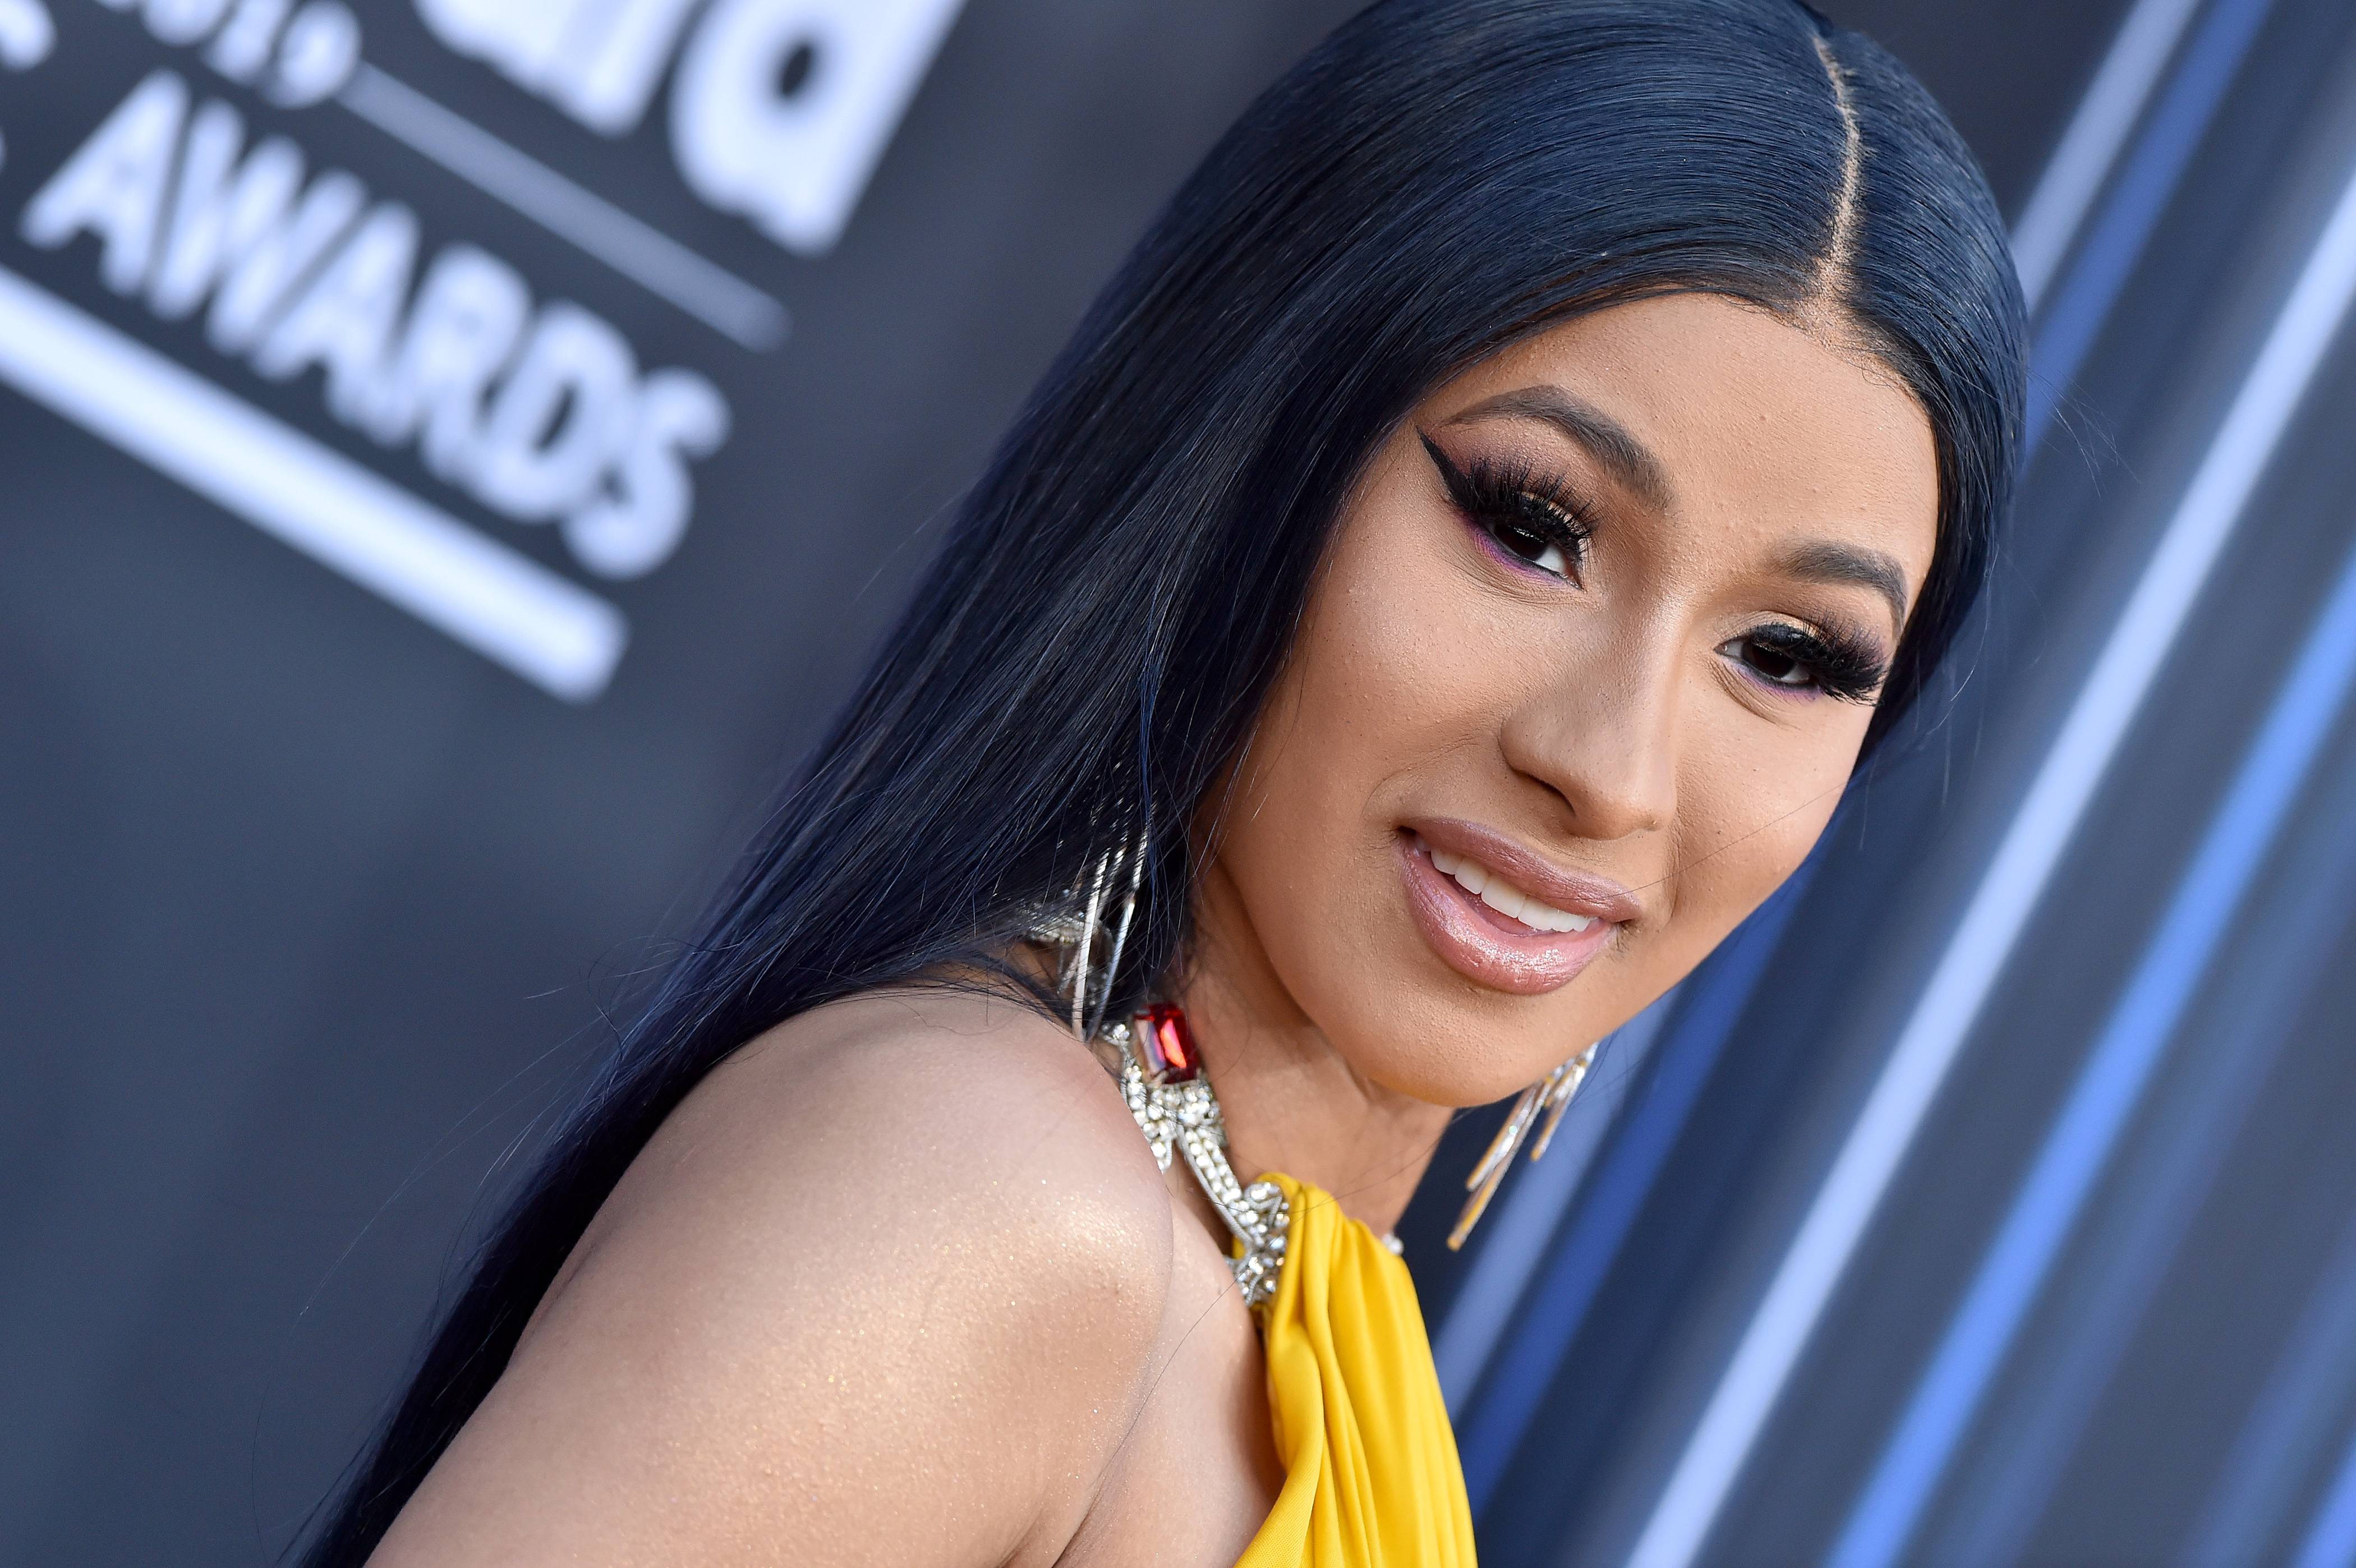 LAS VEGAS, NEVADA - MAY 01: Cardi B attends the 2019 Billboard Music Awards at MGM Grand Garden Arena on May 01, 2019 in Las Vegas, Nevada. (Photo by Axelle/Bauer-Griffin/FilmMagic)